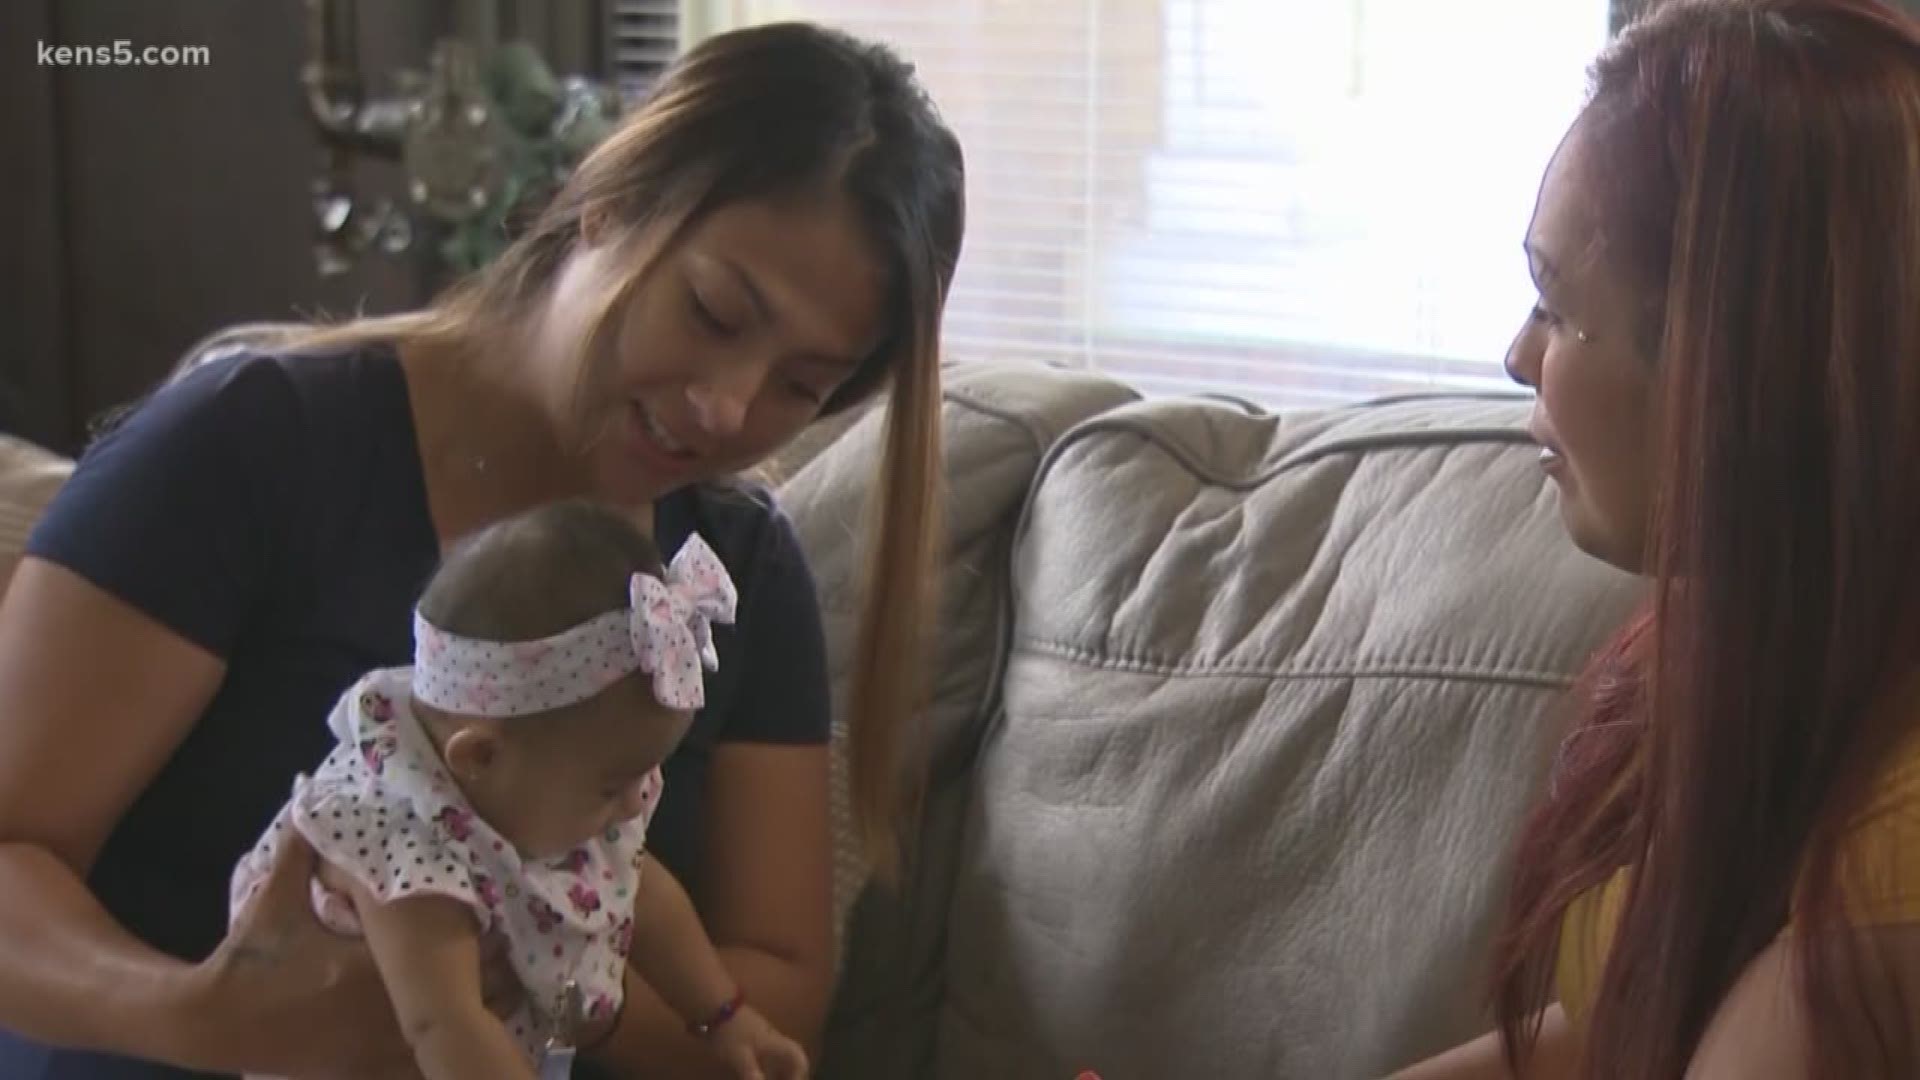 Thousands of babies in Bexar County face an uphill battle in the form of neonatal abstinence syndrome.  Audrey Castoreno introduces us to Casa Mia, a place where both mom and baby can get life-changing help.